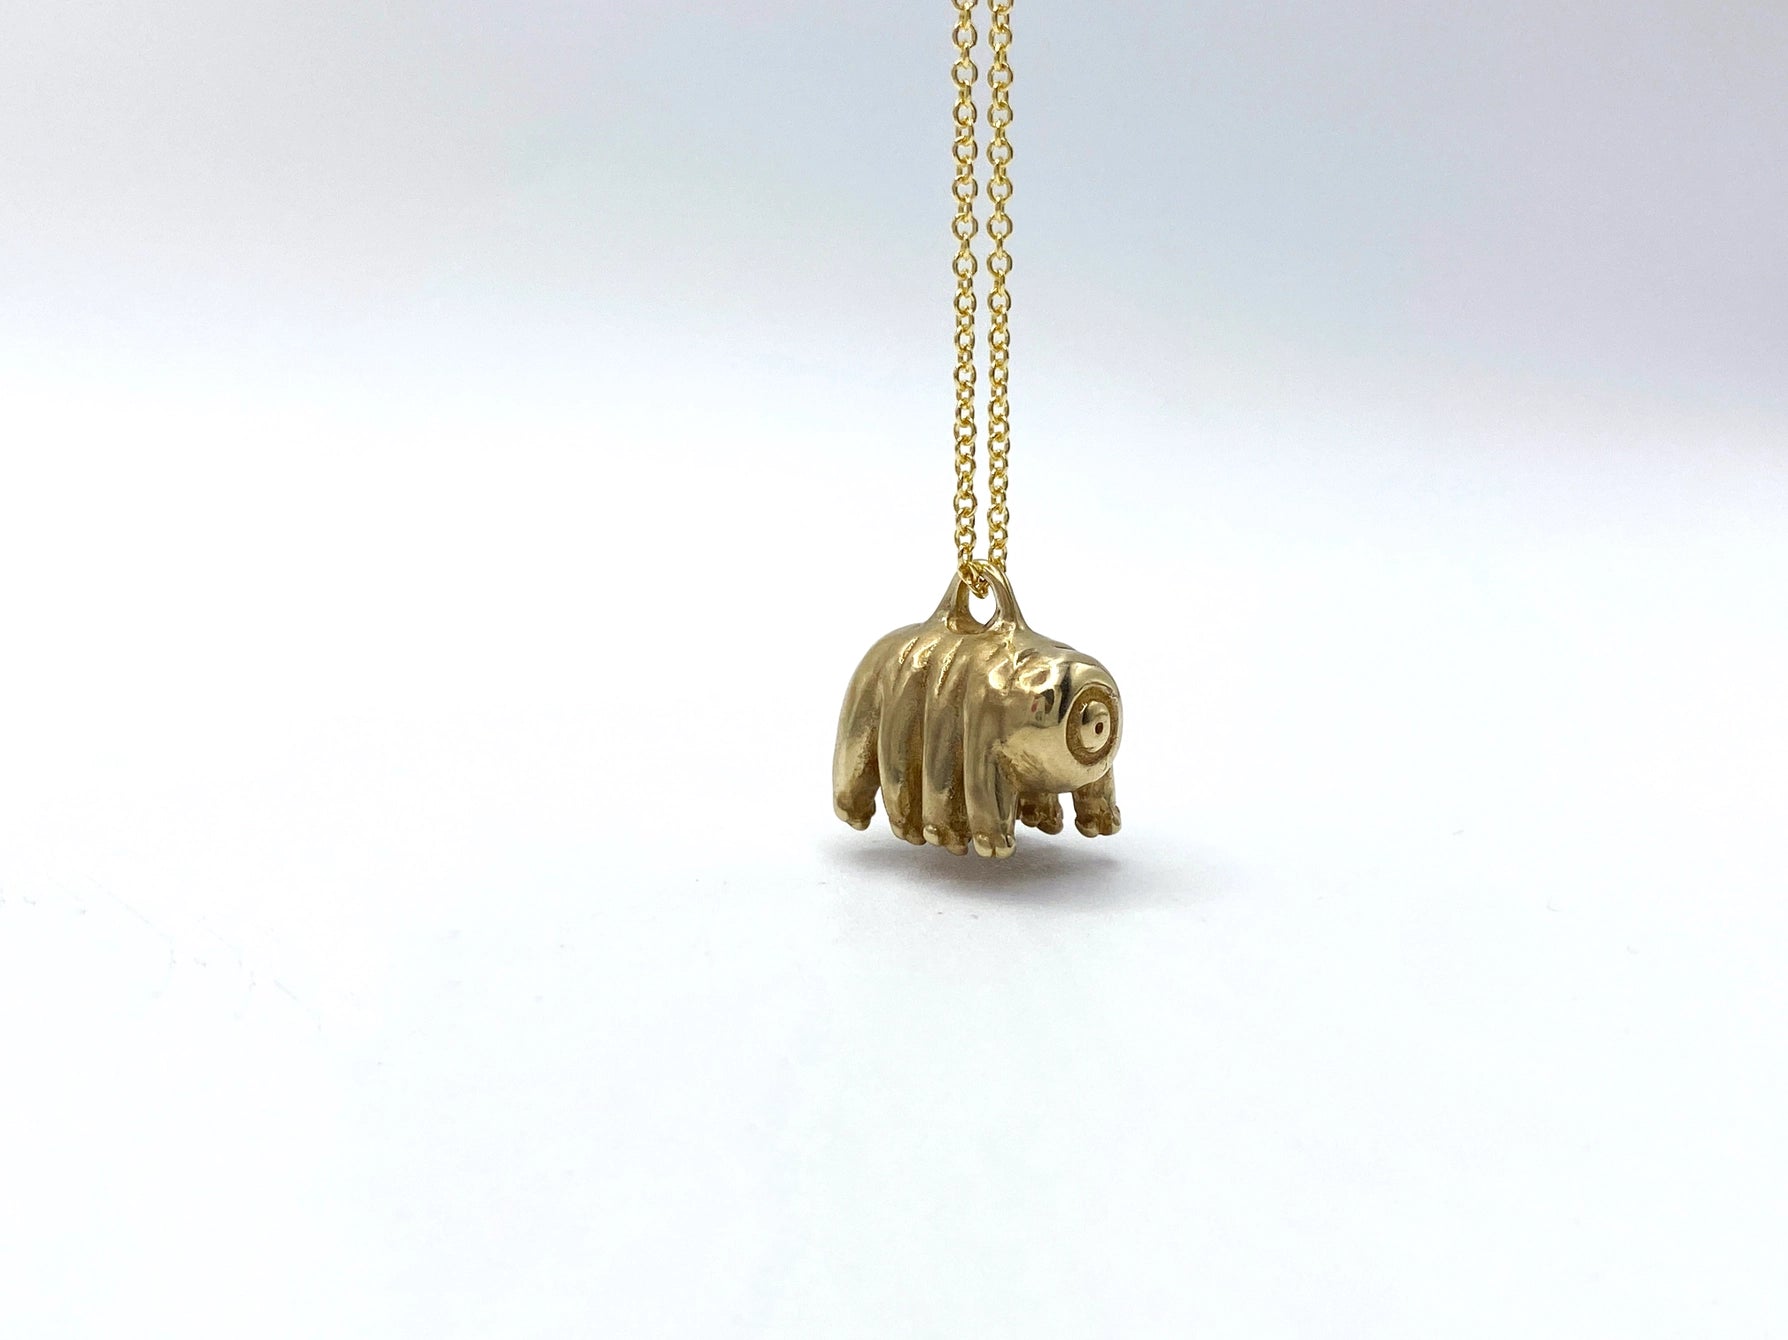 Gold filled necklace with bronze bear animal